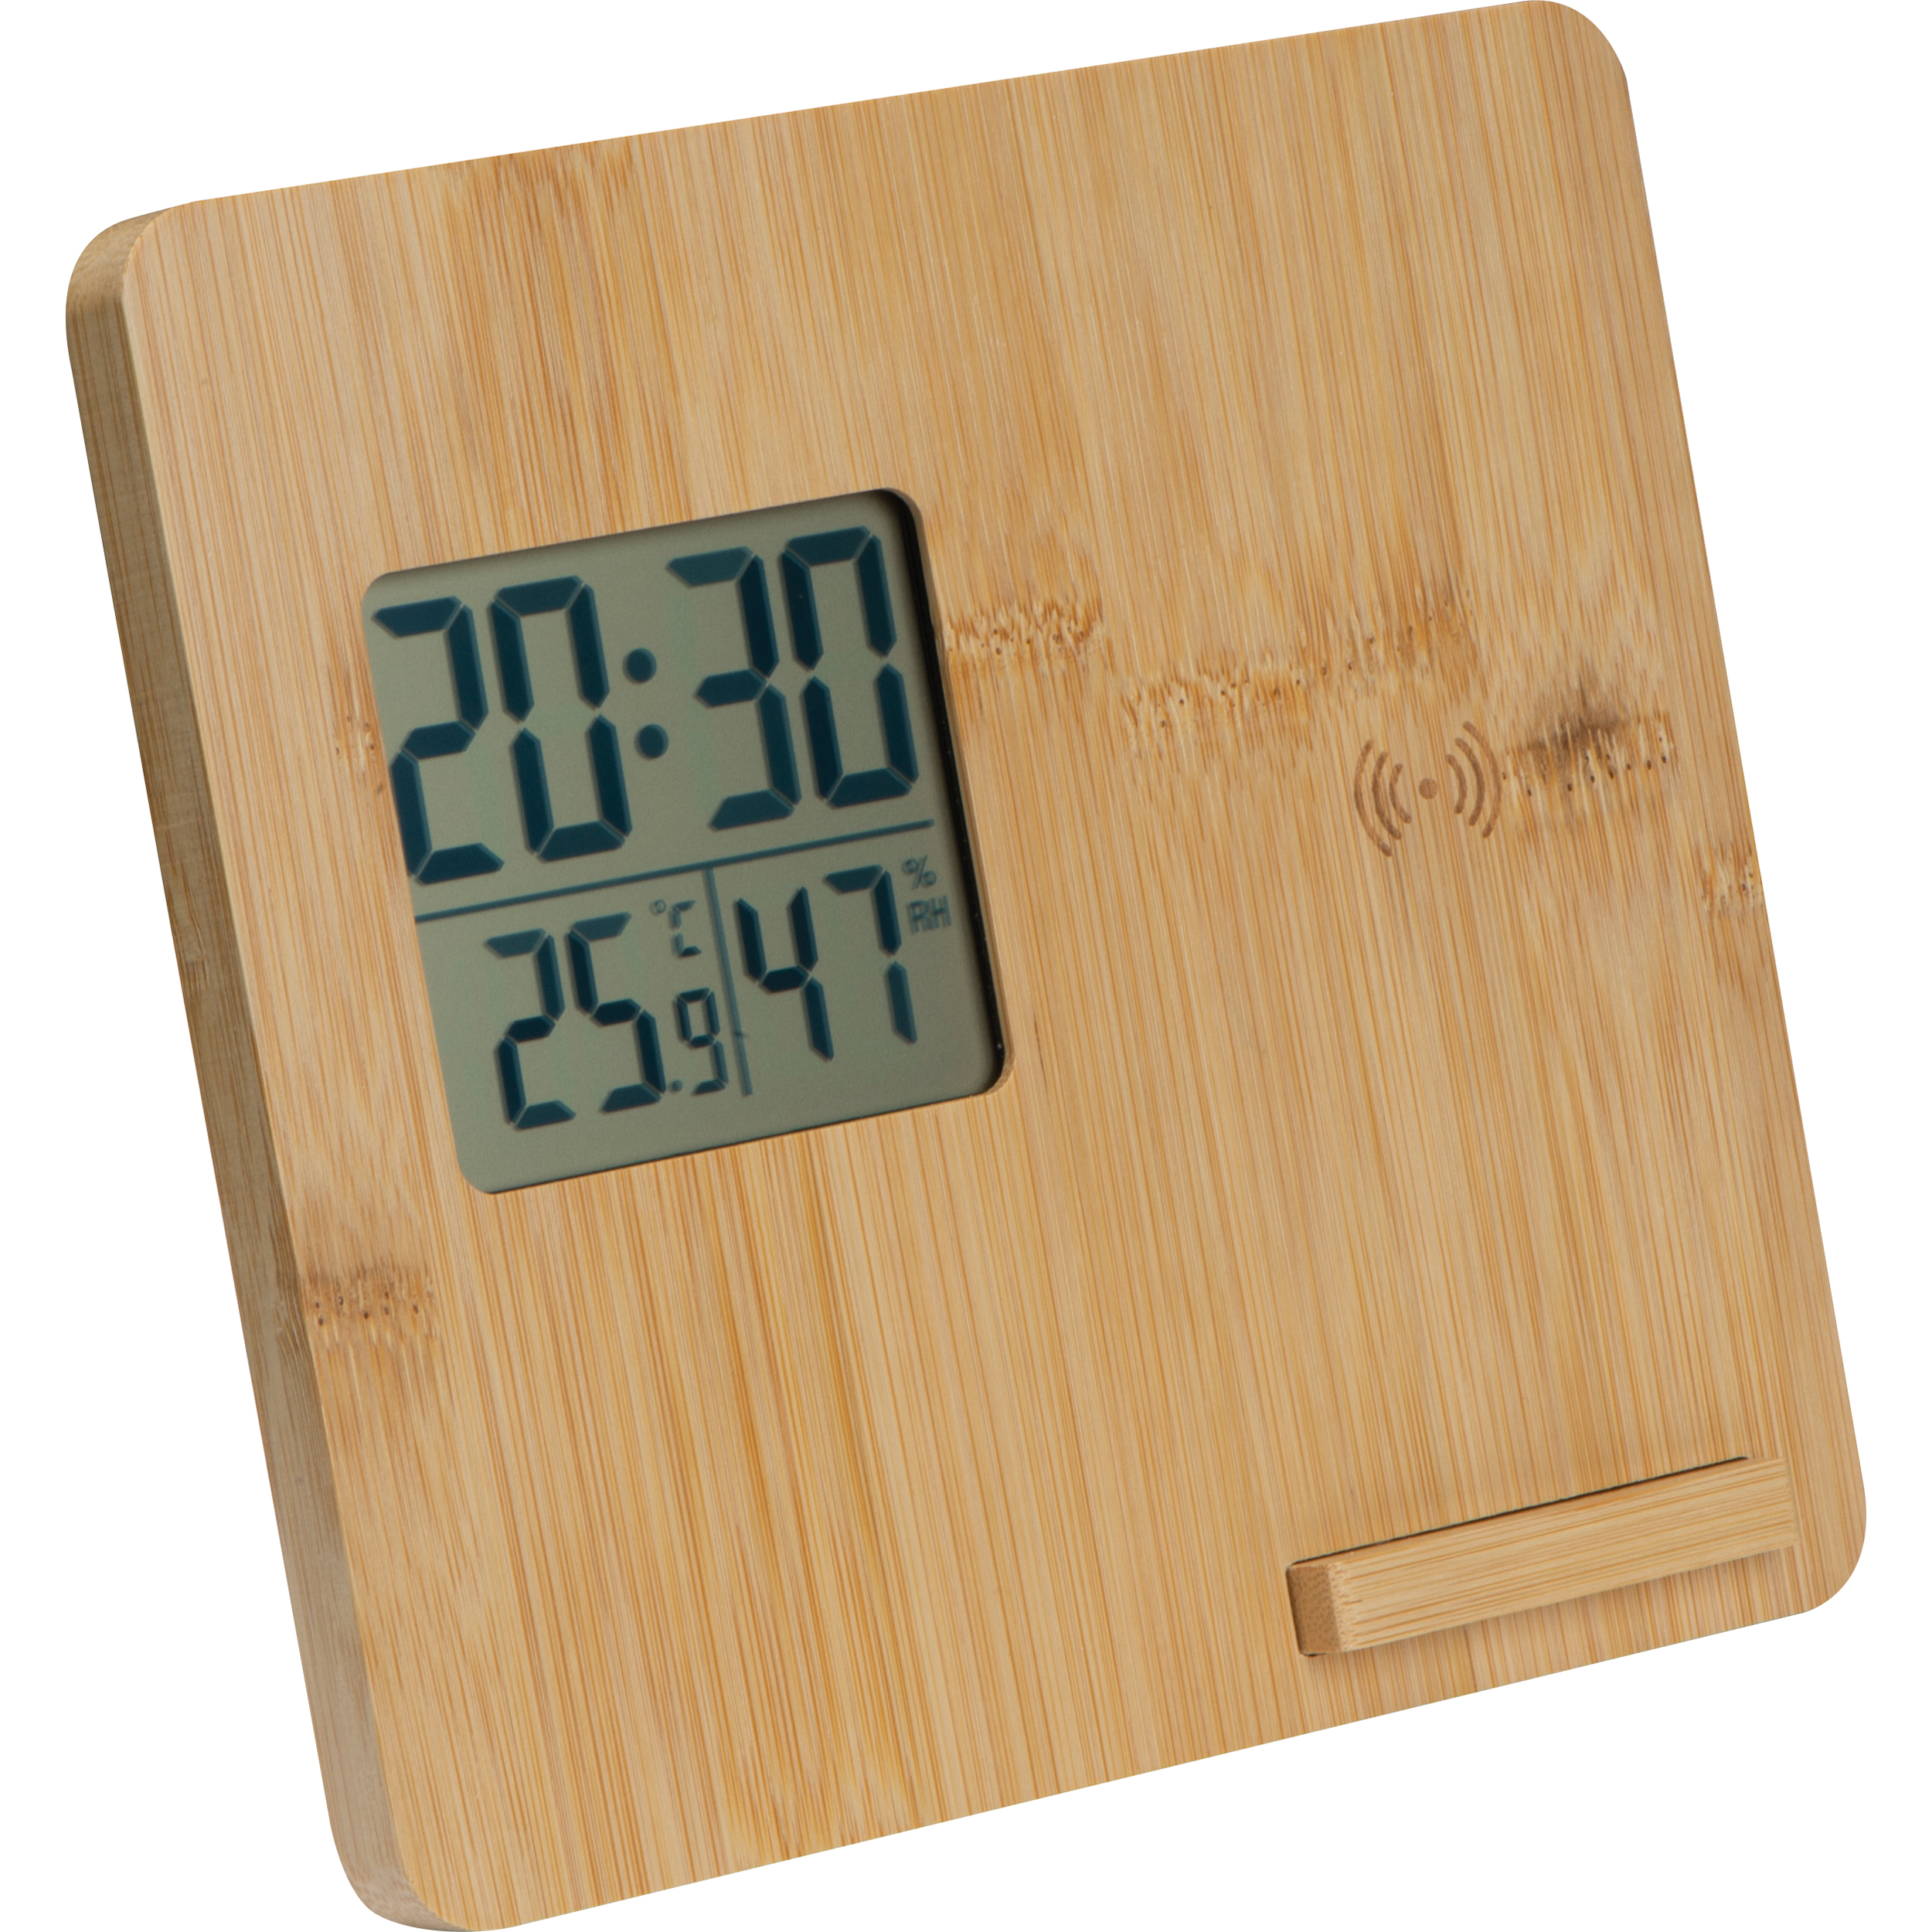 Bamboo weather station